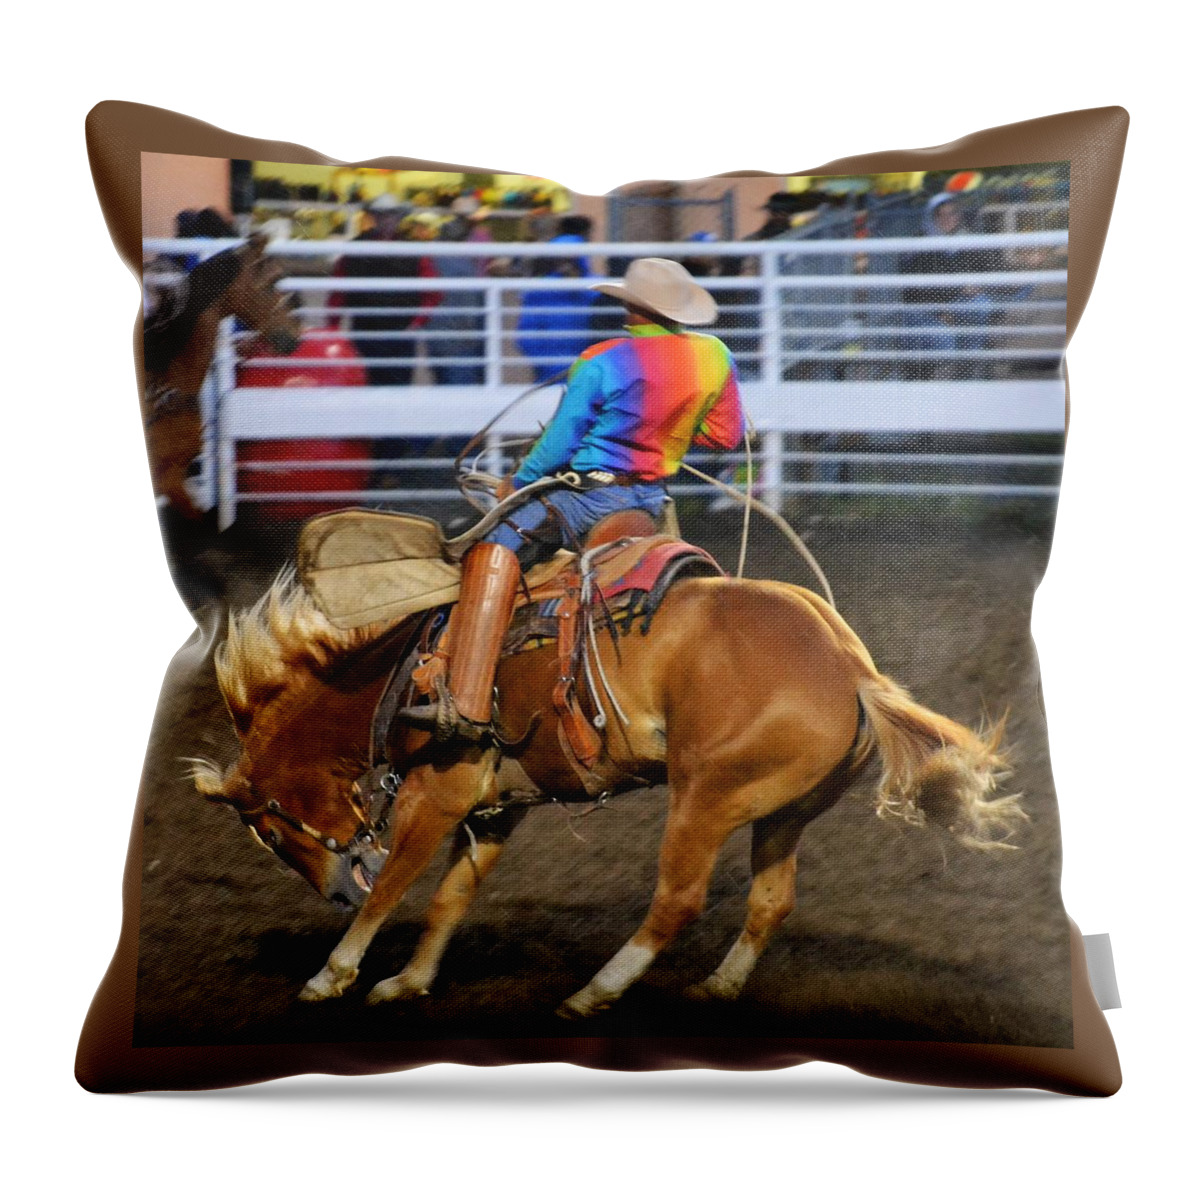 Rodeo Throw Pillow featuring the photograph Uh-Oh by Alden White Ballard